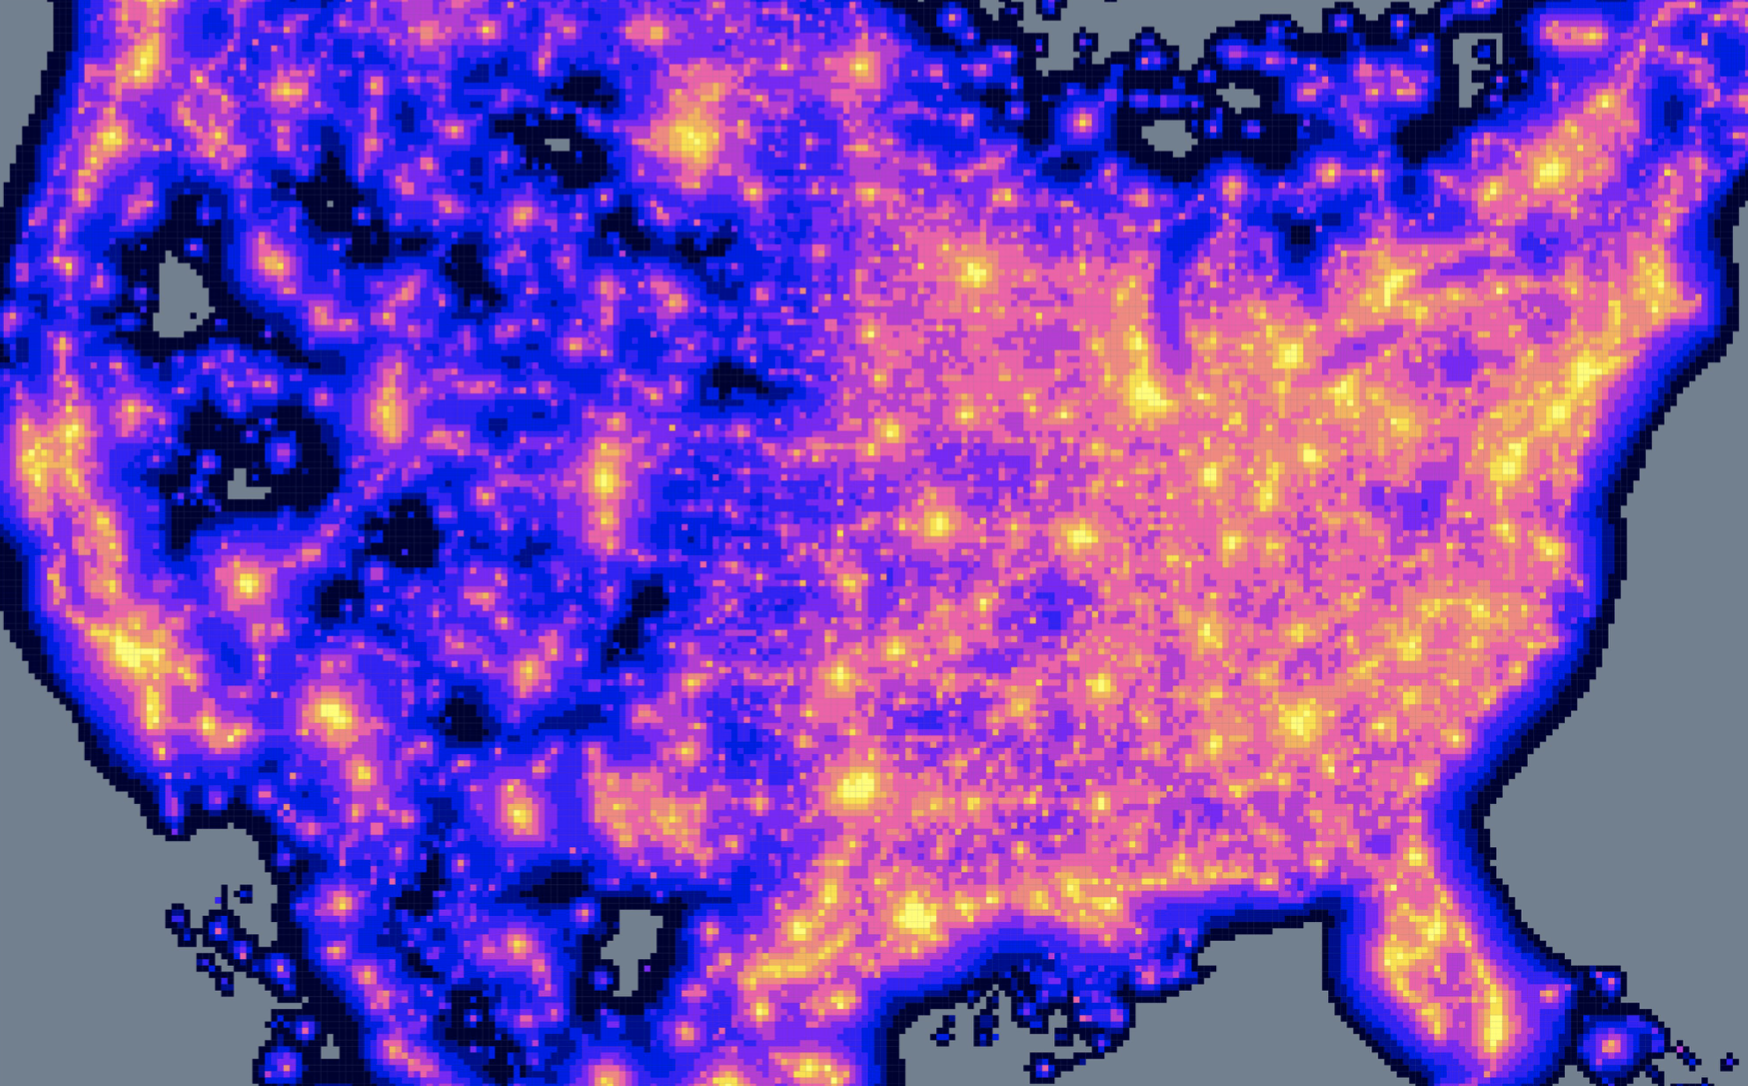 A map of the United States showing areas with high light pollution.